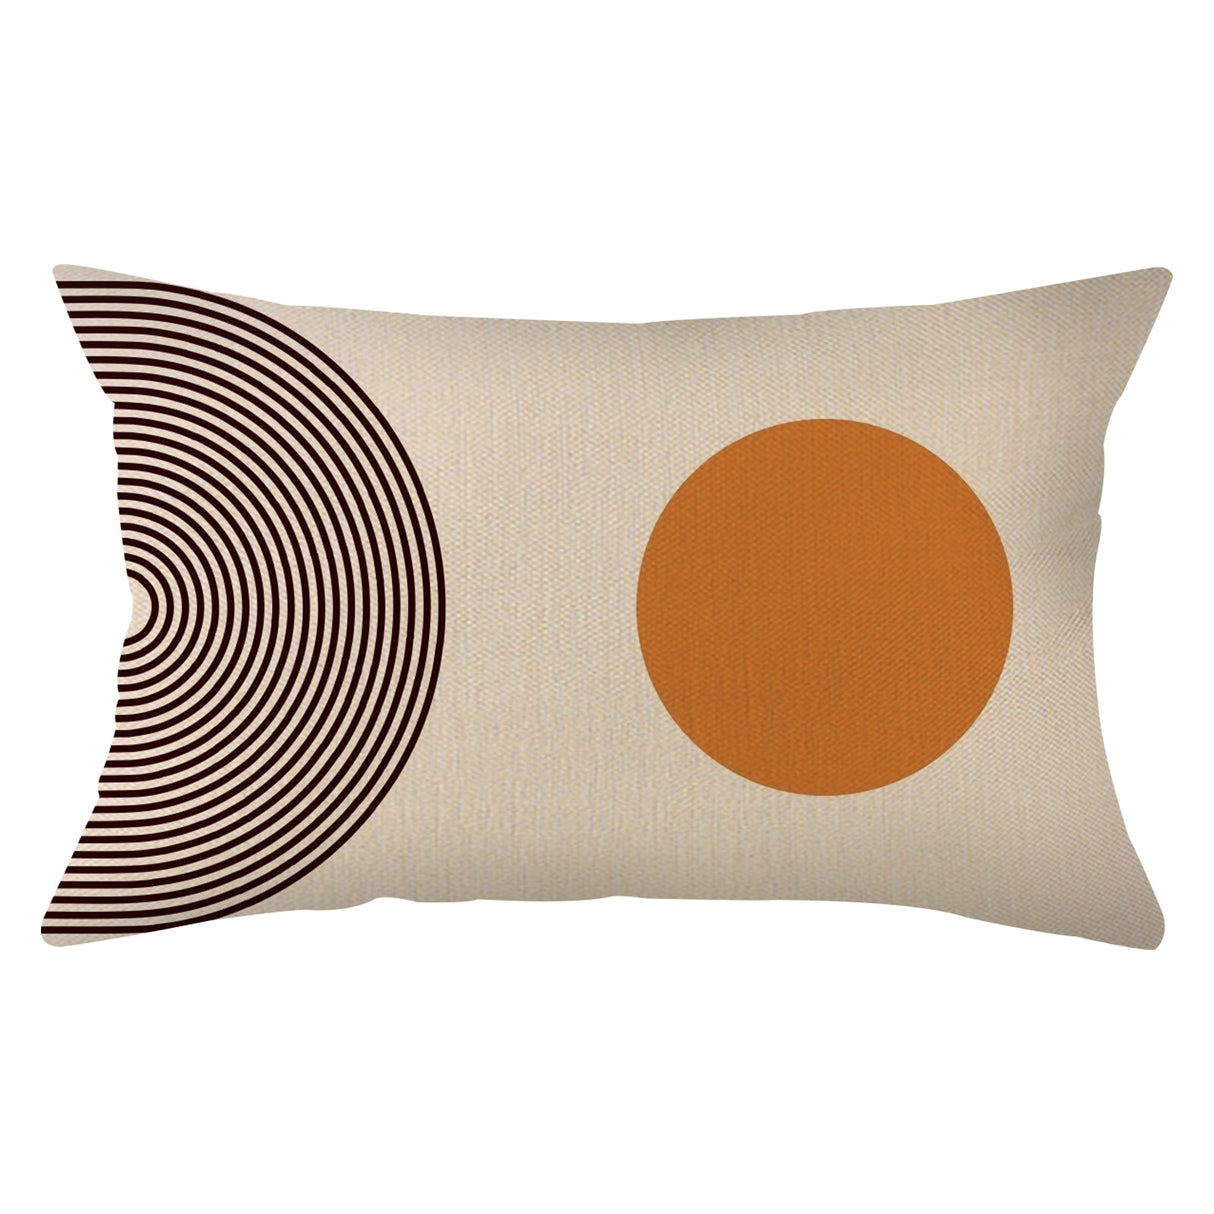 Geometry Pillow Cover - Crystal Decor Shop